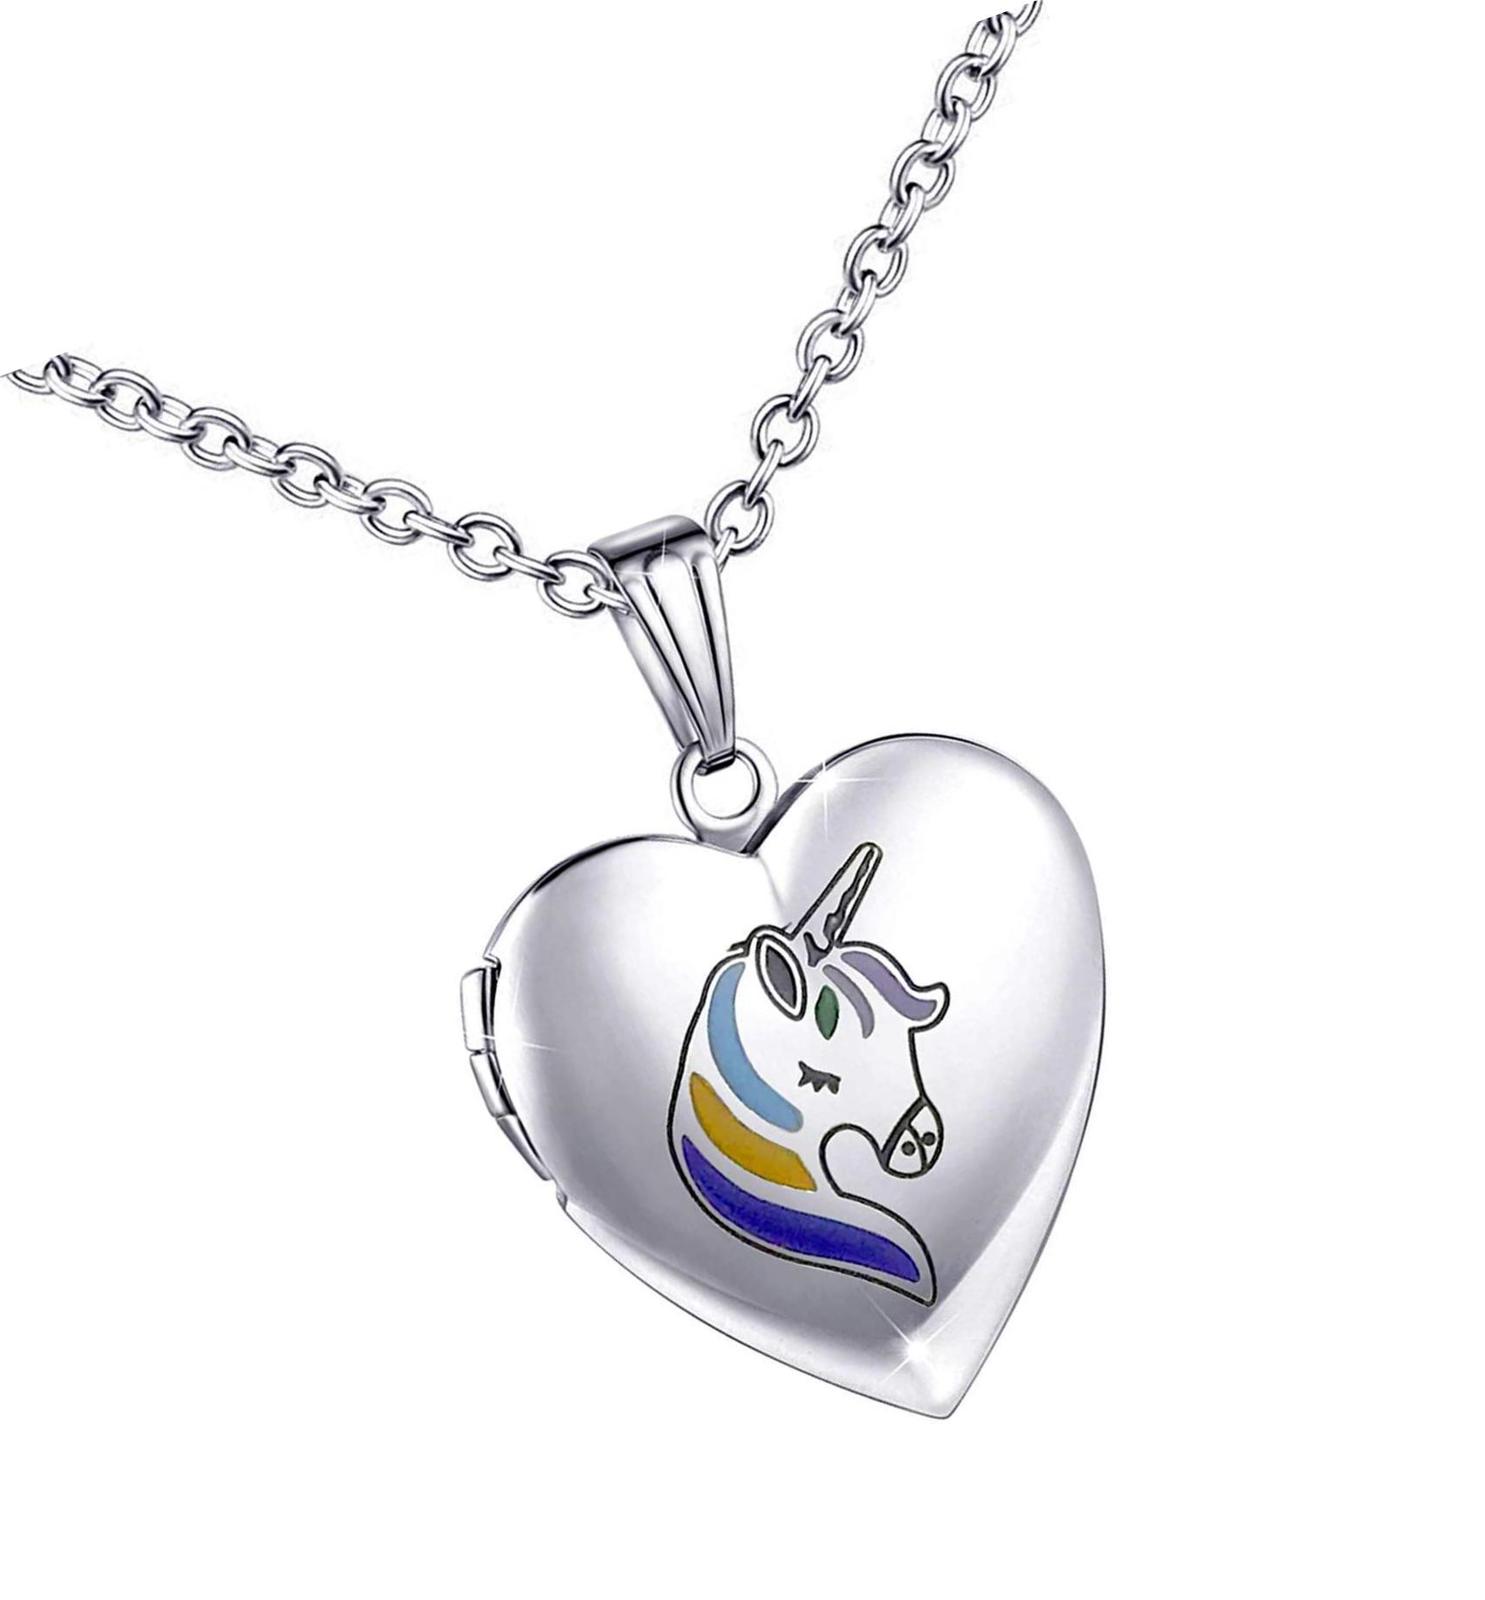 Primary image for Unicorns Gifts for Girls Love Heart Locket Necklace